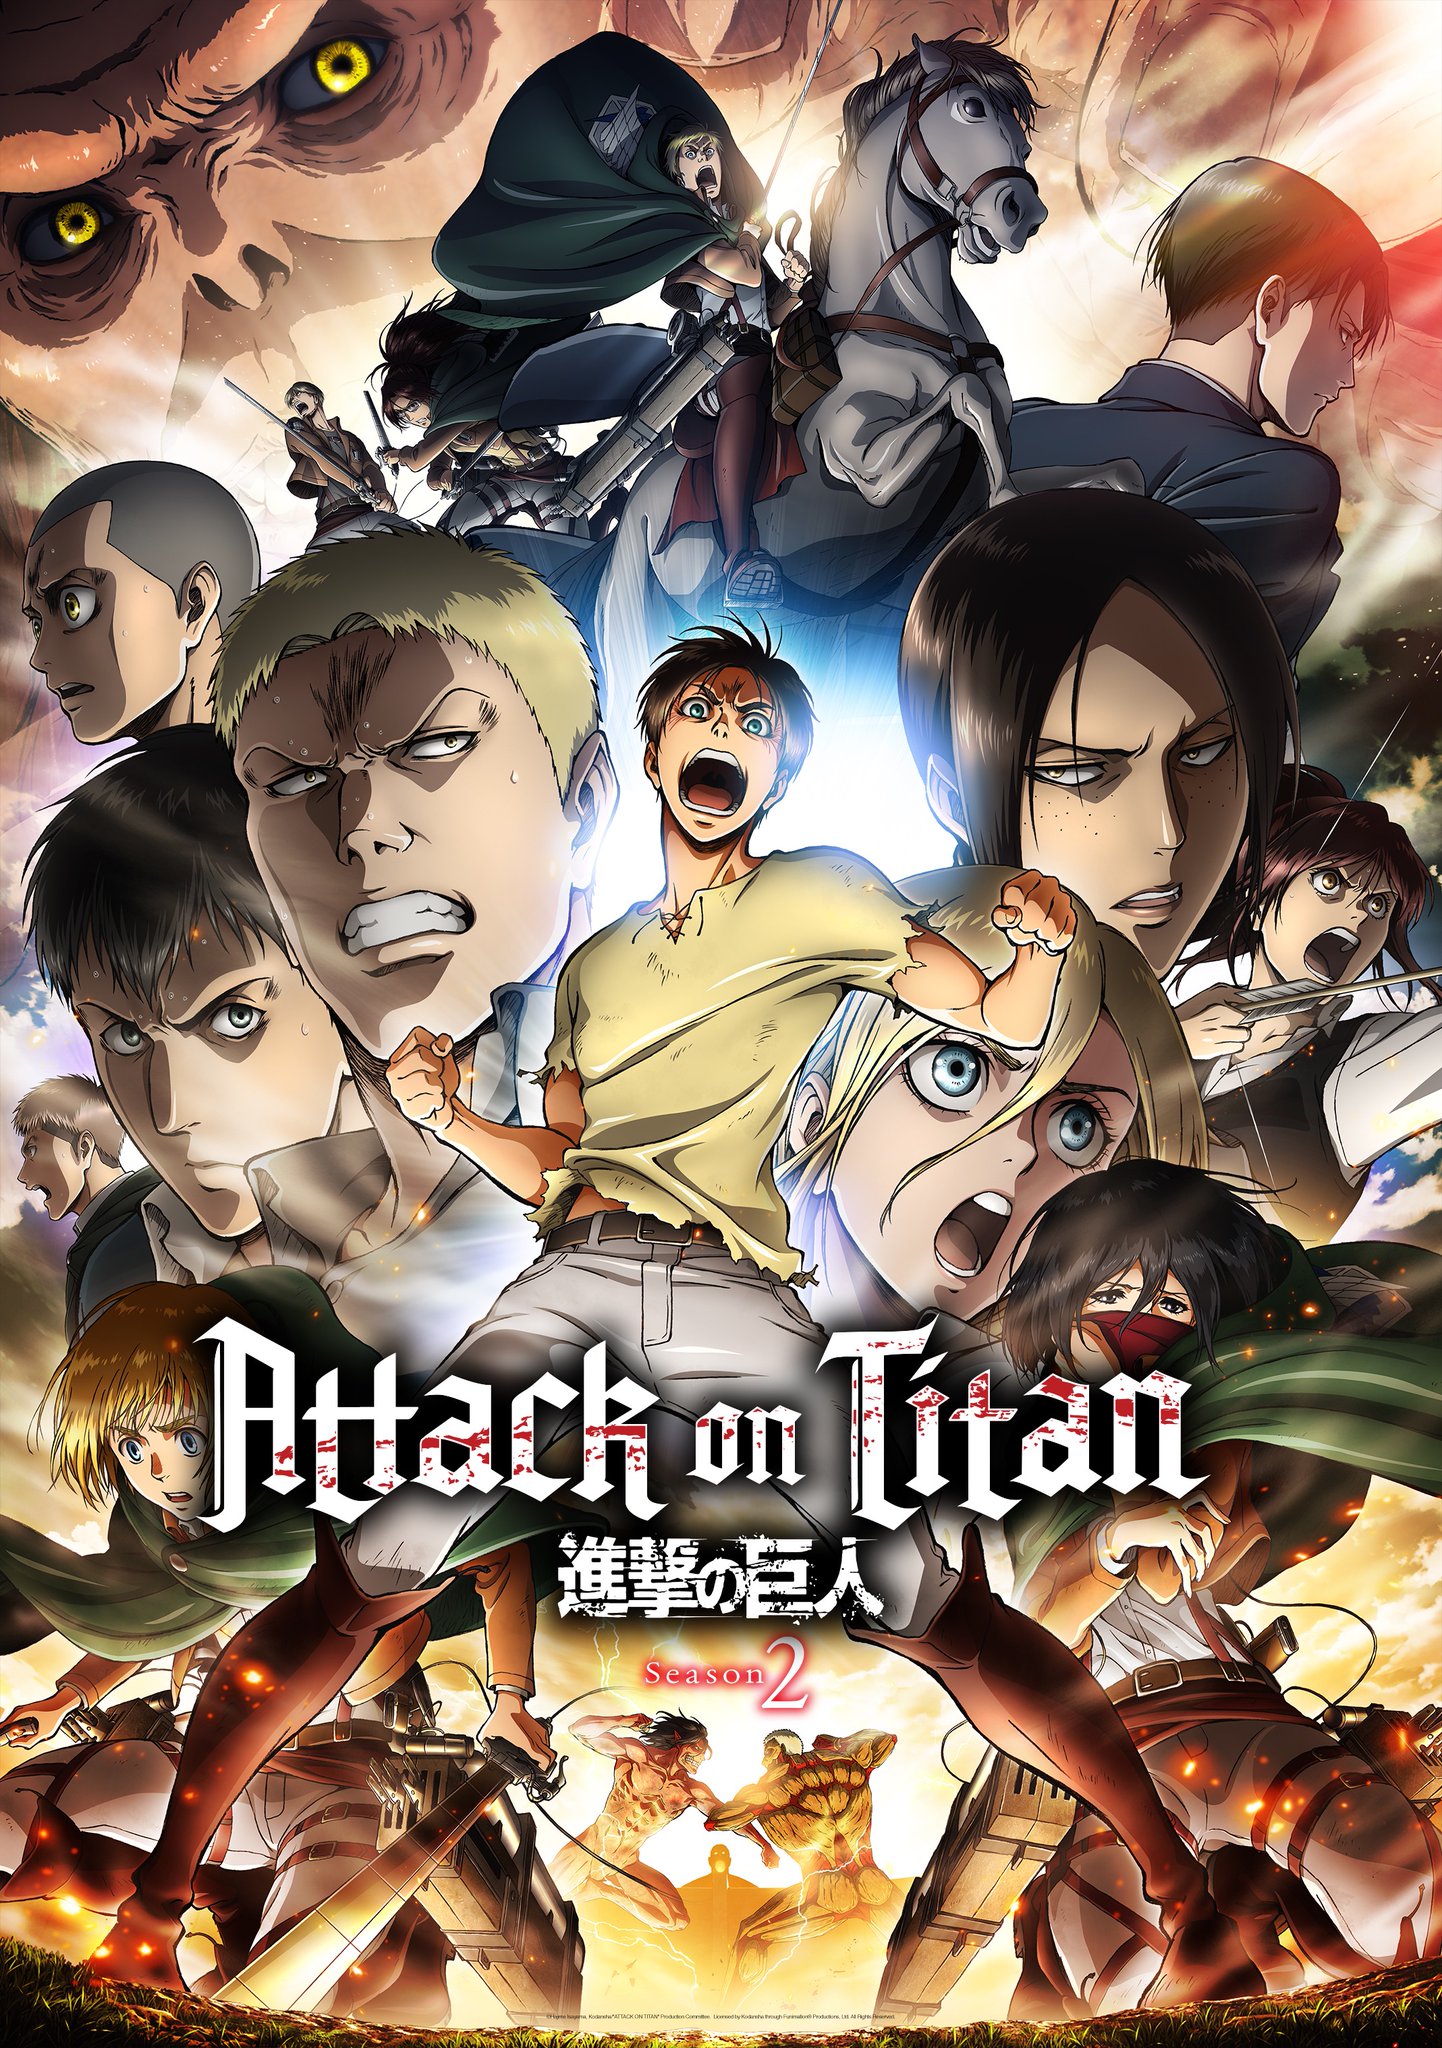 Attack on Titan: Final Season Discussion - Forums 